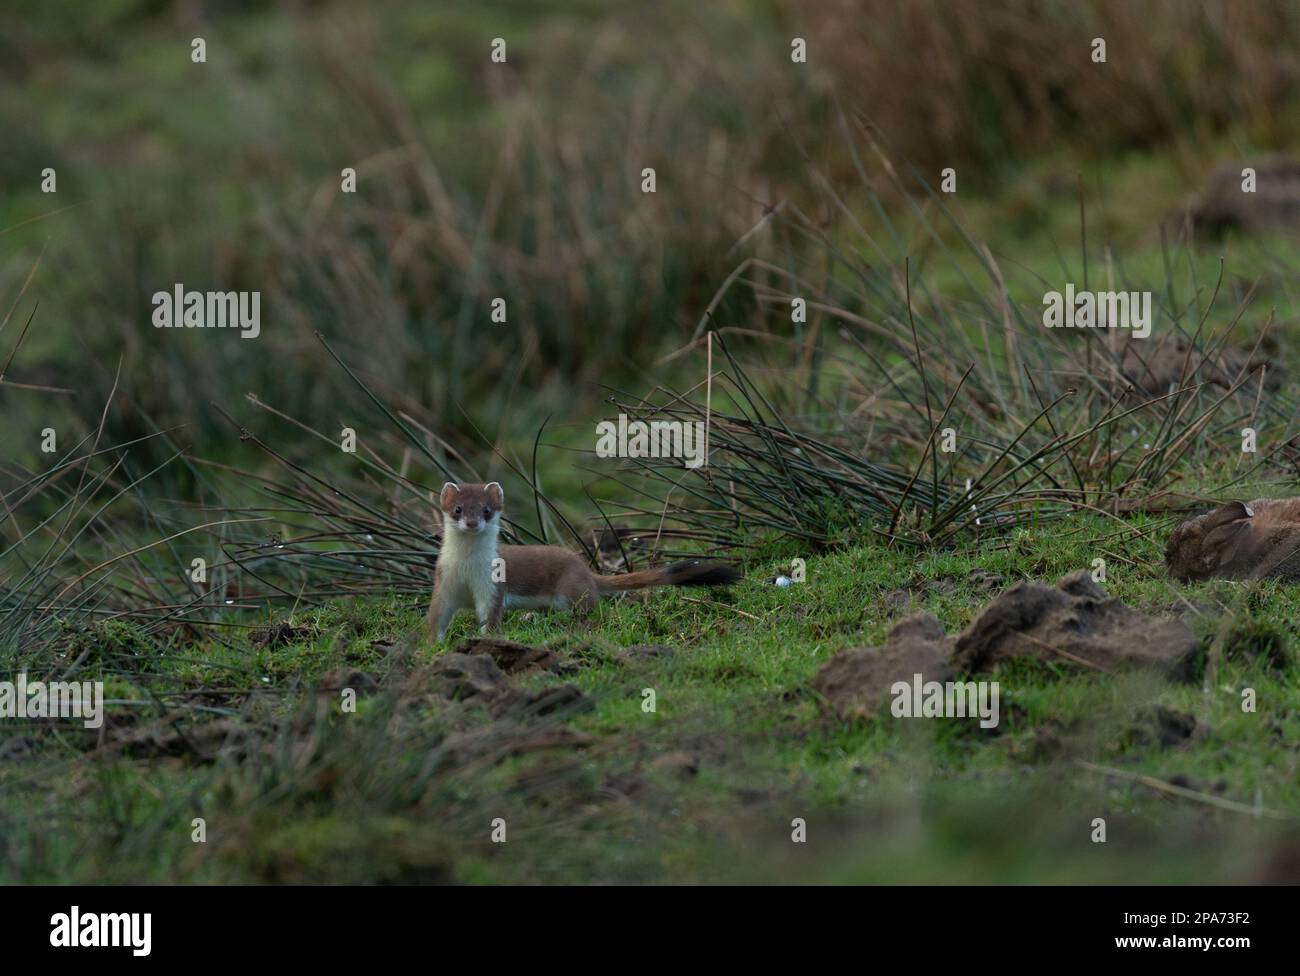 A stoat (Mustela erminea) peers warily while in moorland close to Diggle in Saddleworth near Oldham, UK Stock Photo